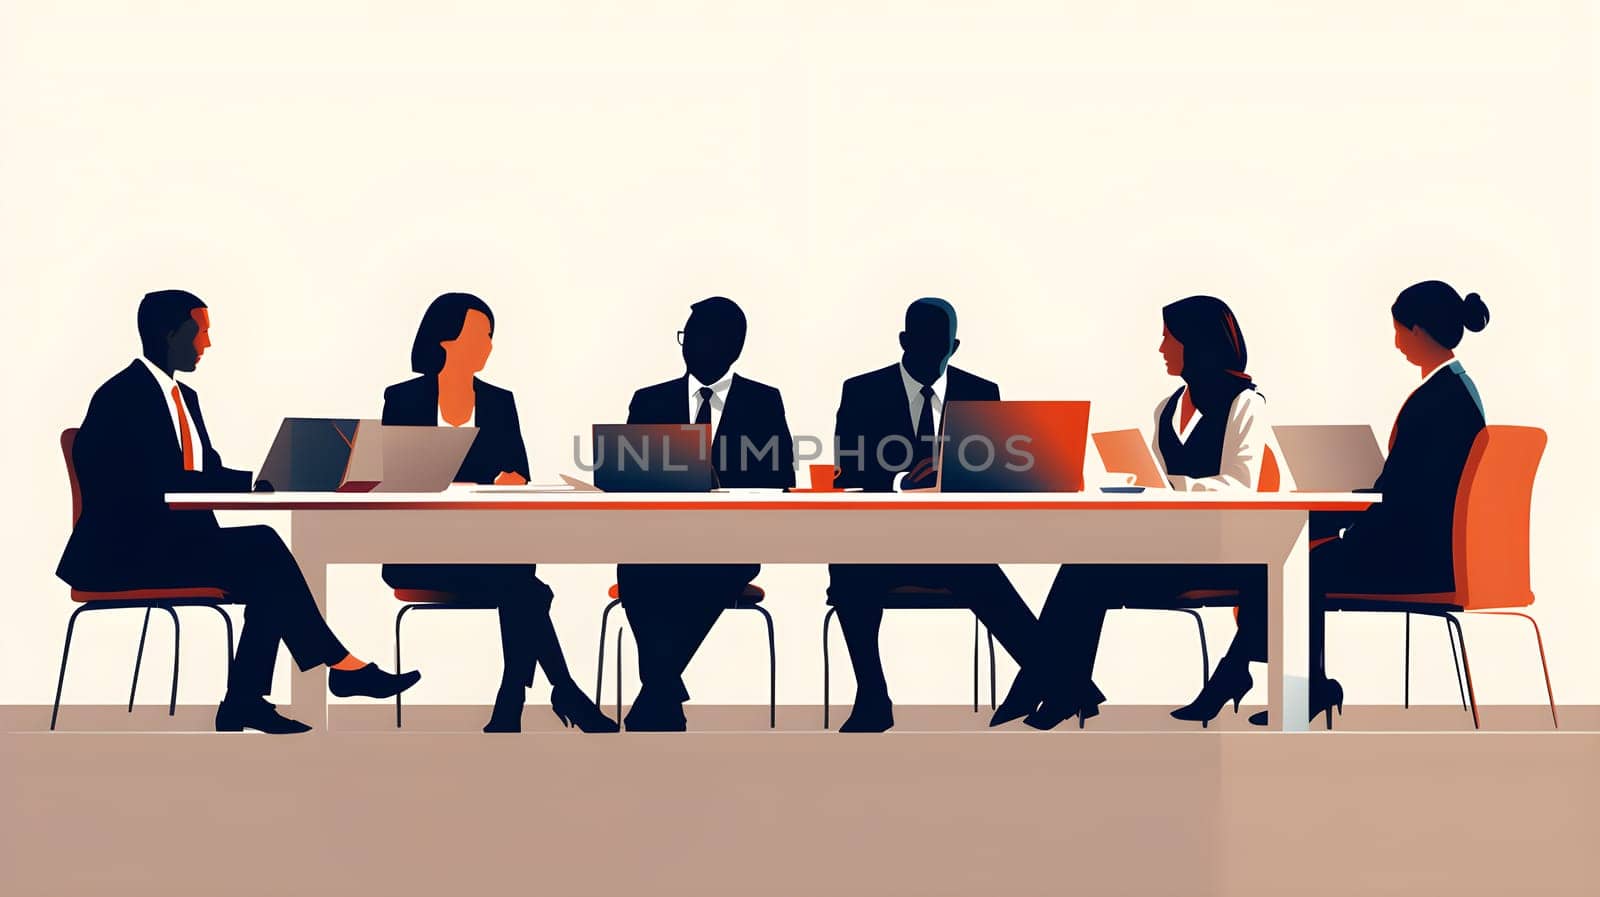 A minimalist illustration of business people in a meeting - corporate concept - generative AI by chrisroll